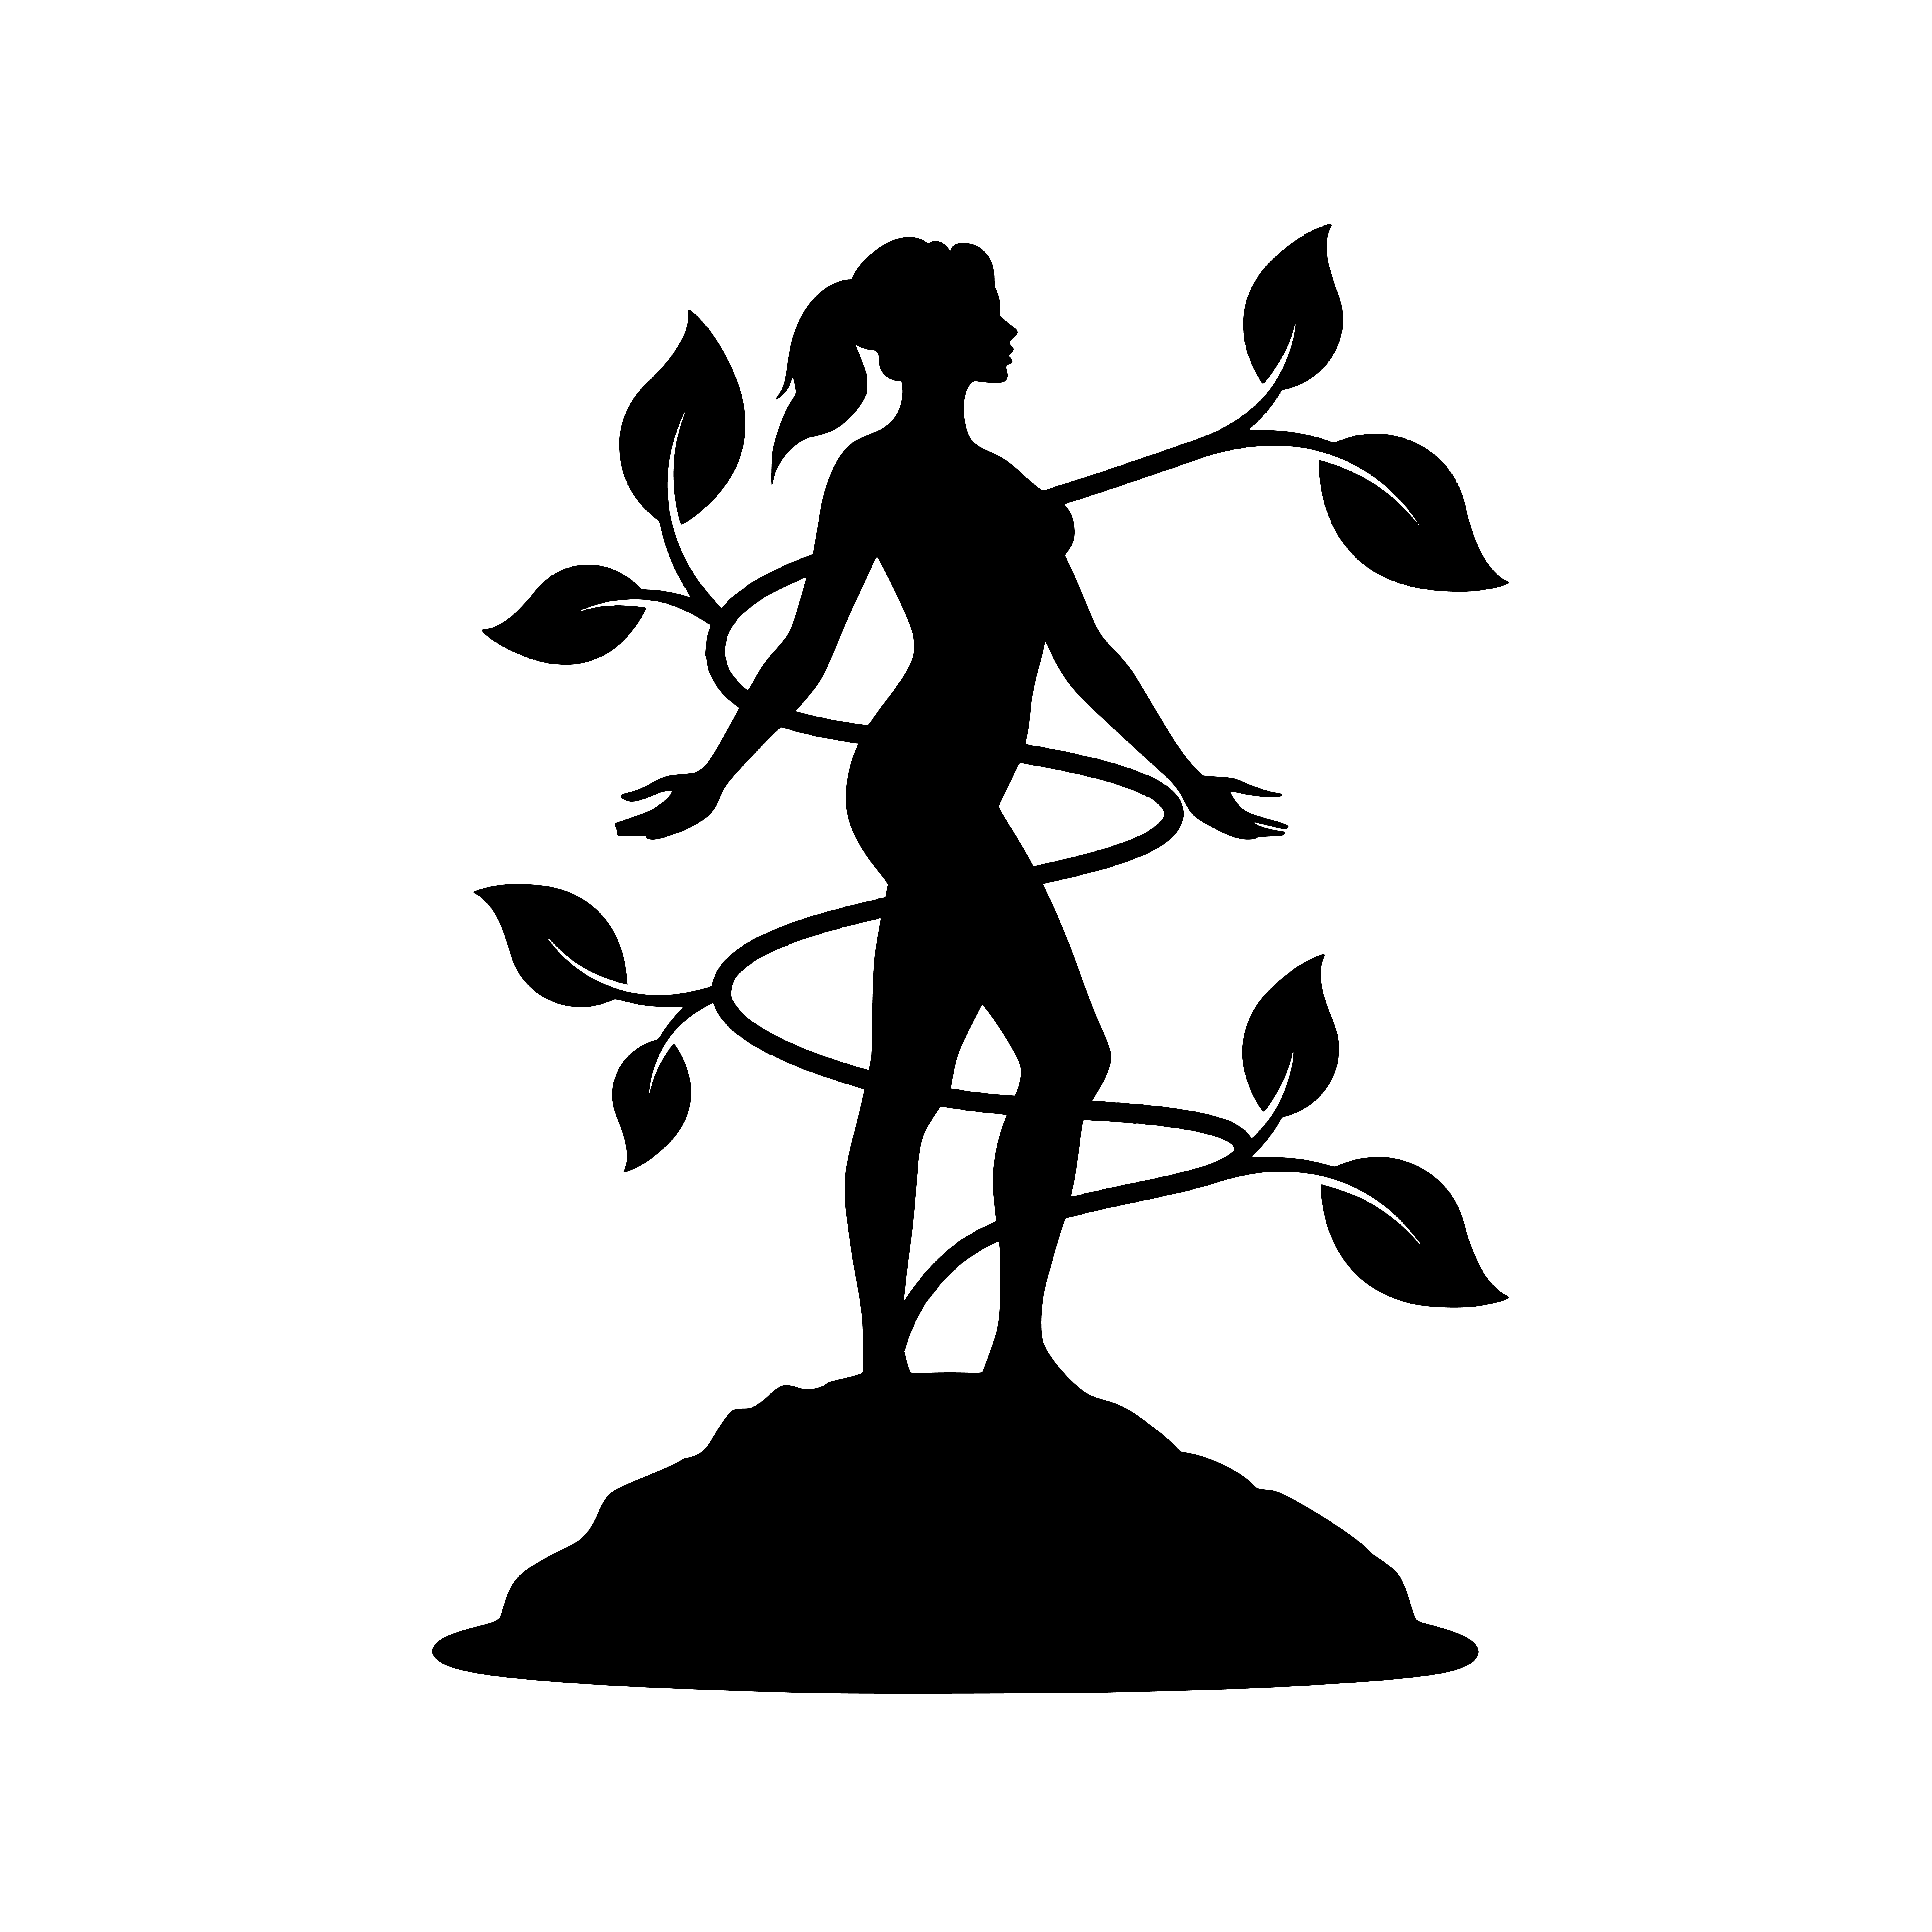 Wellness and nature silhouette design